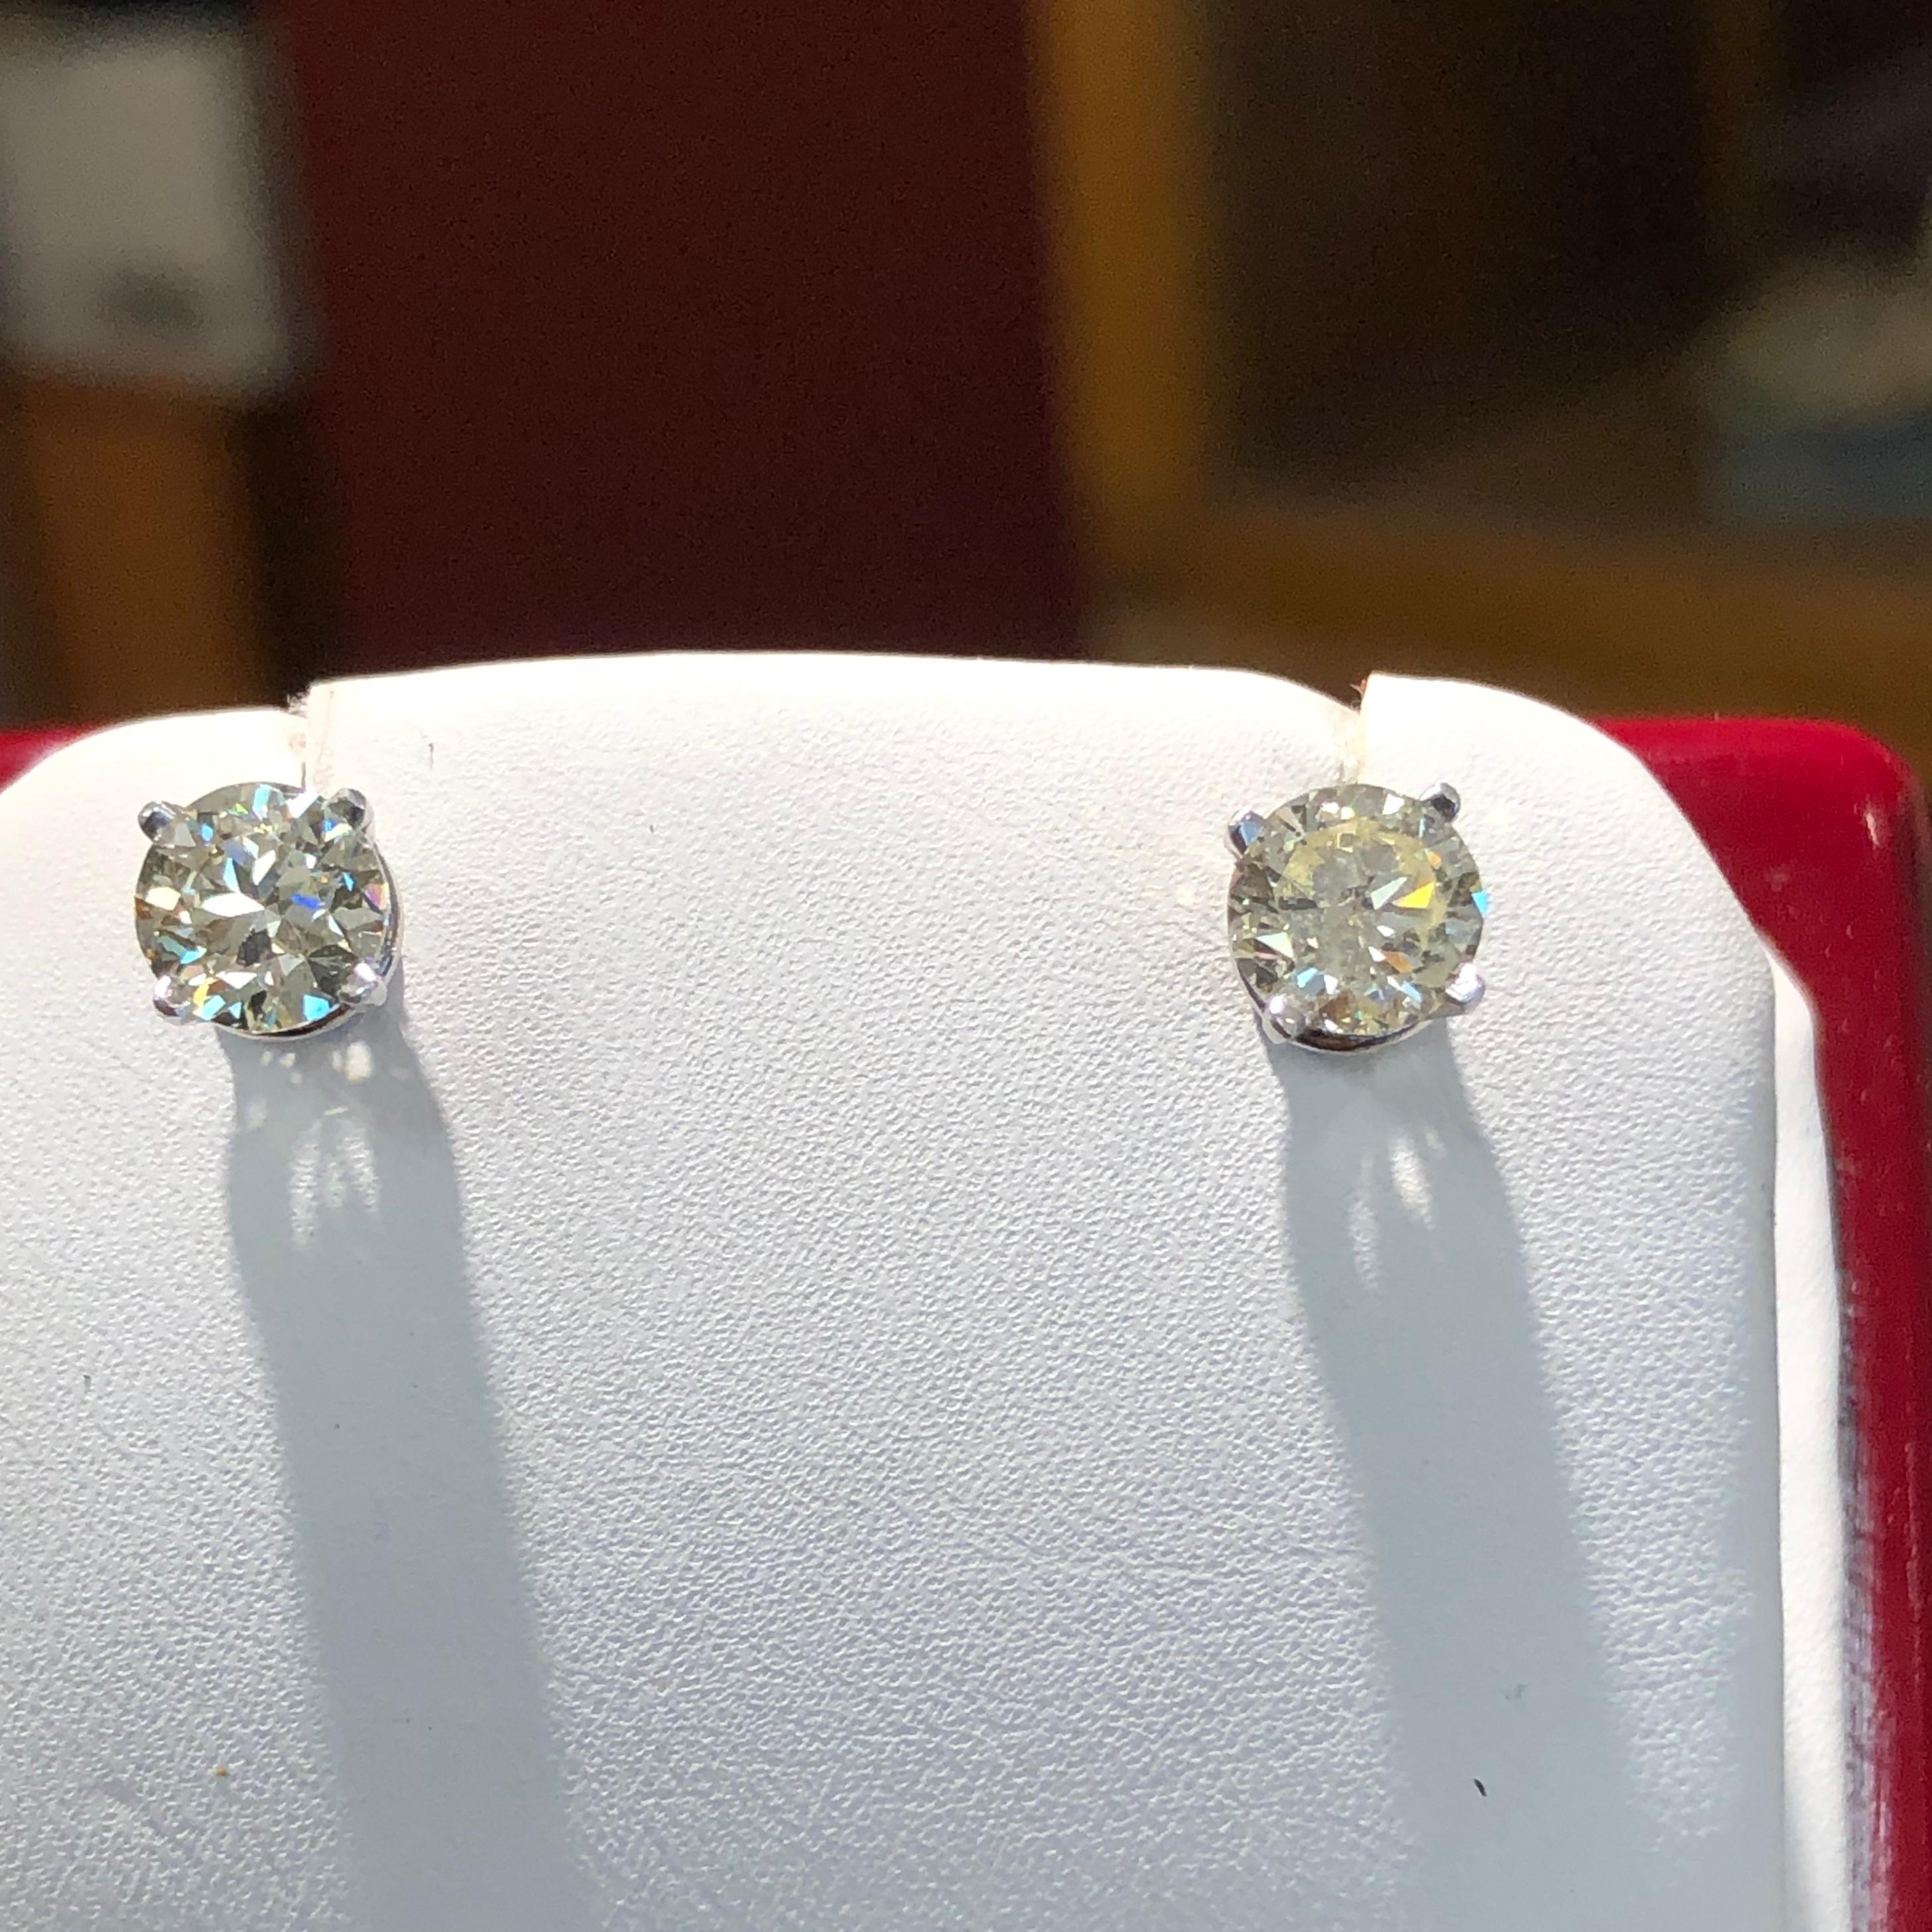 These GIA diamond stud earrings feature two matching perfectly natural diamonds total weight 2.01 carat, color O-P range, clarity SI1 round brilliant cut. Each stone is prong set in an open-back setting 14 white gold.
New Condition
